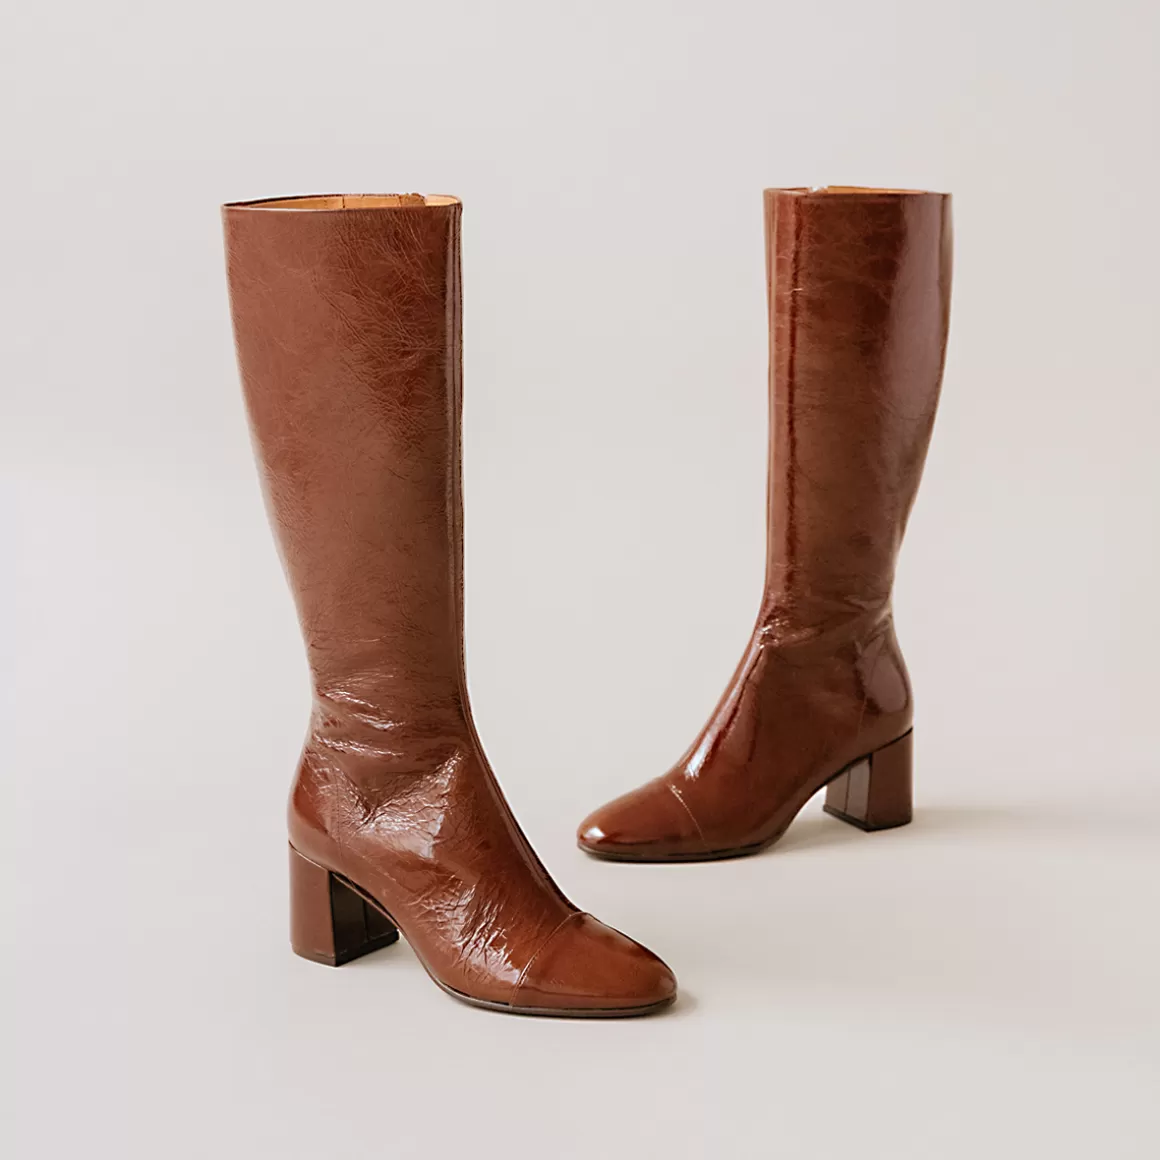 Boots with heels and pointed toes<Jonak Discount